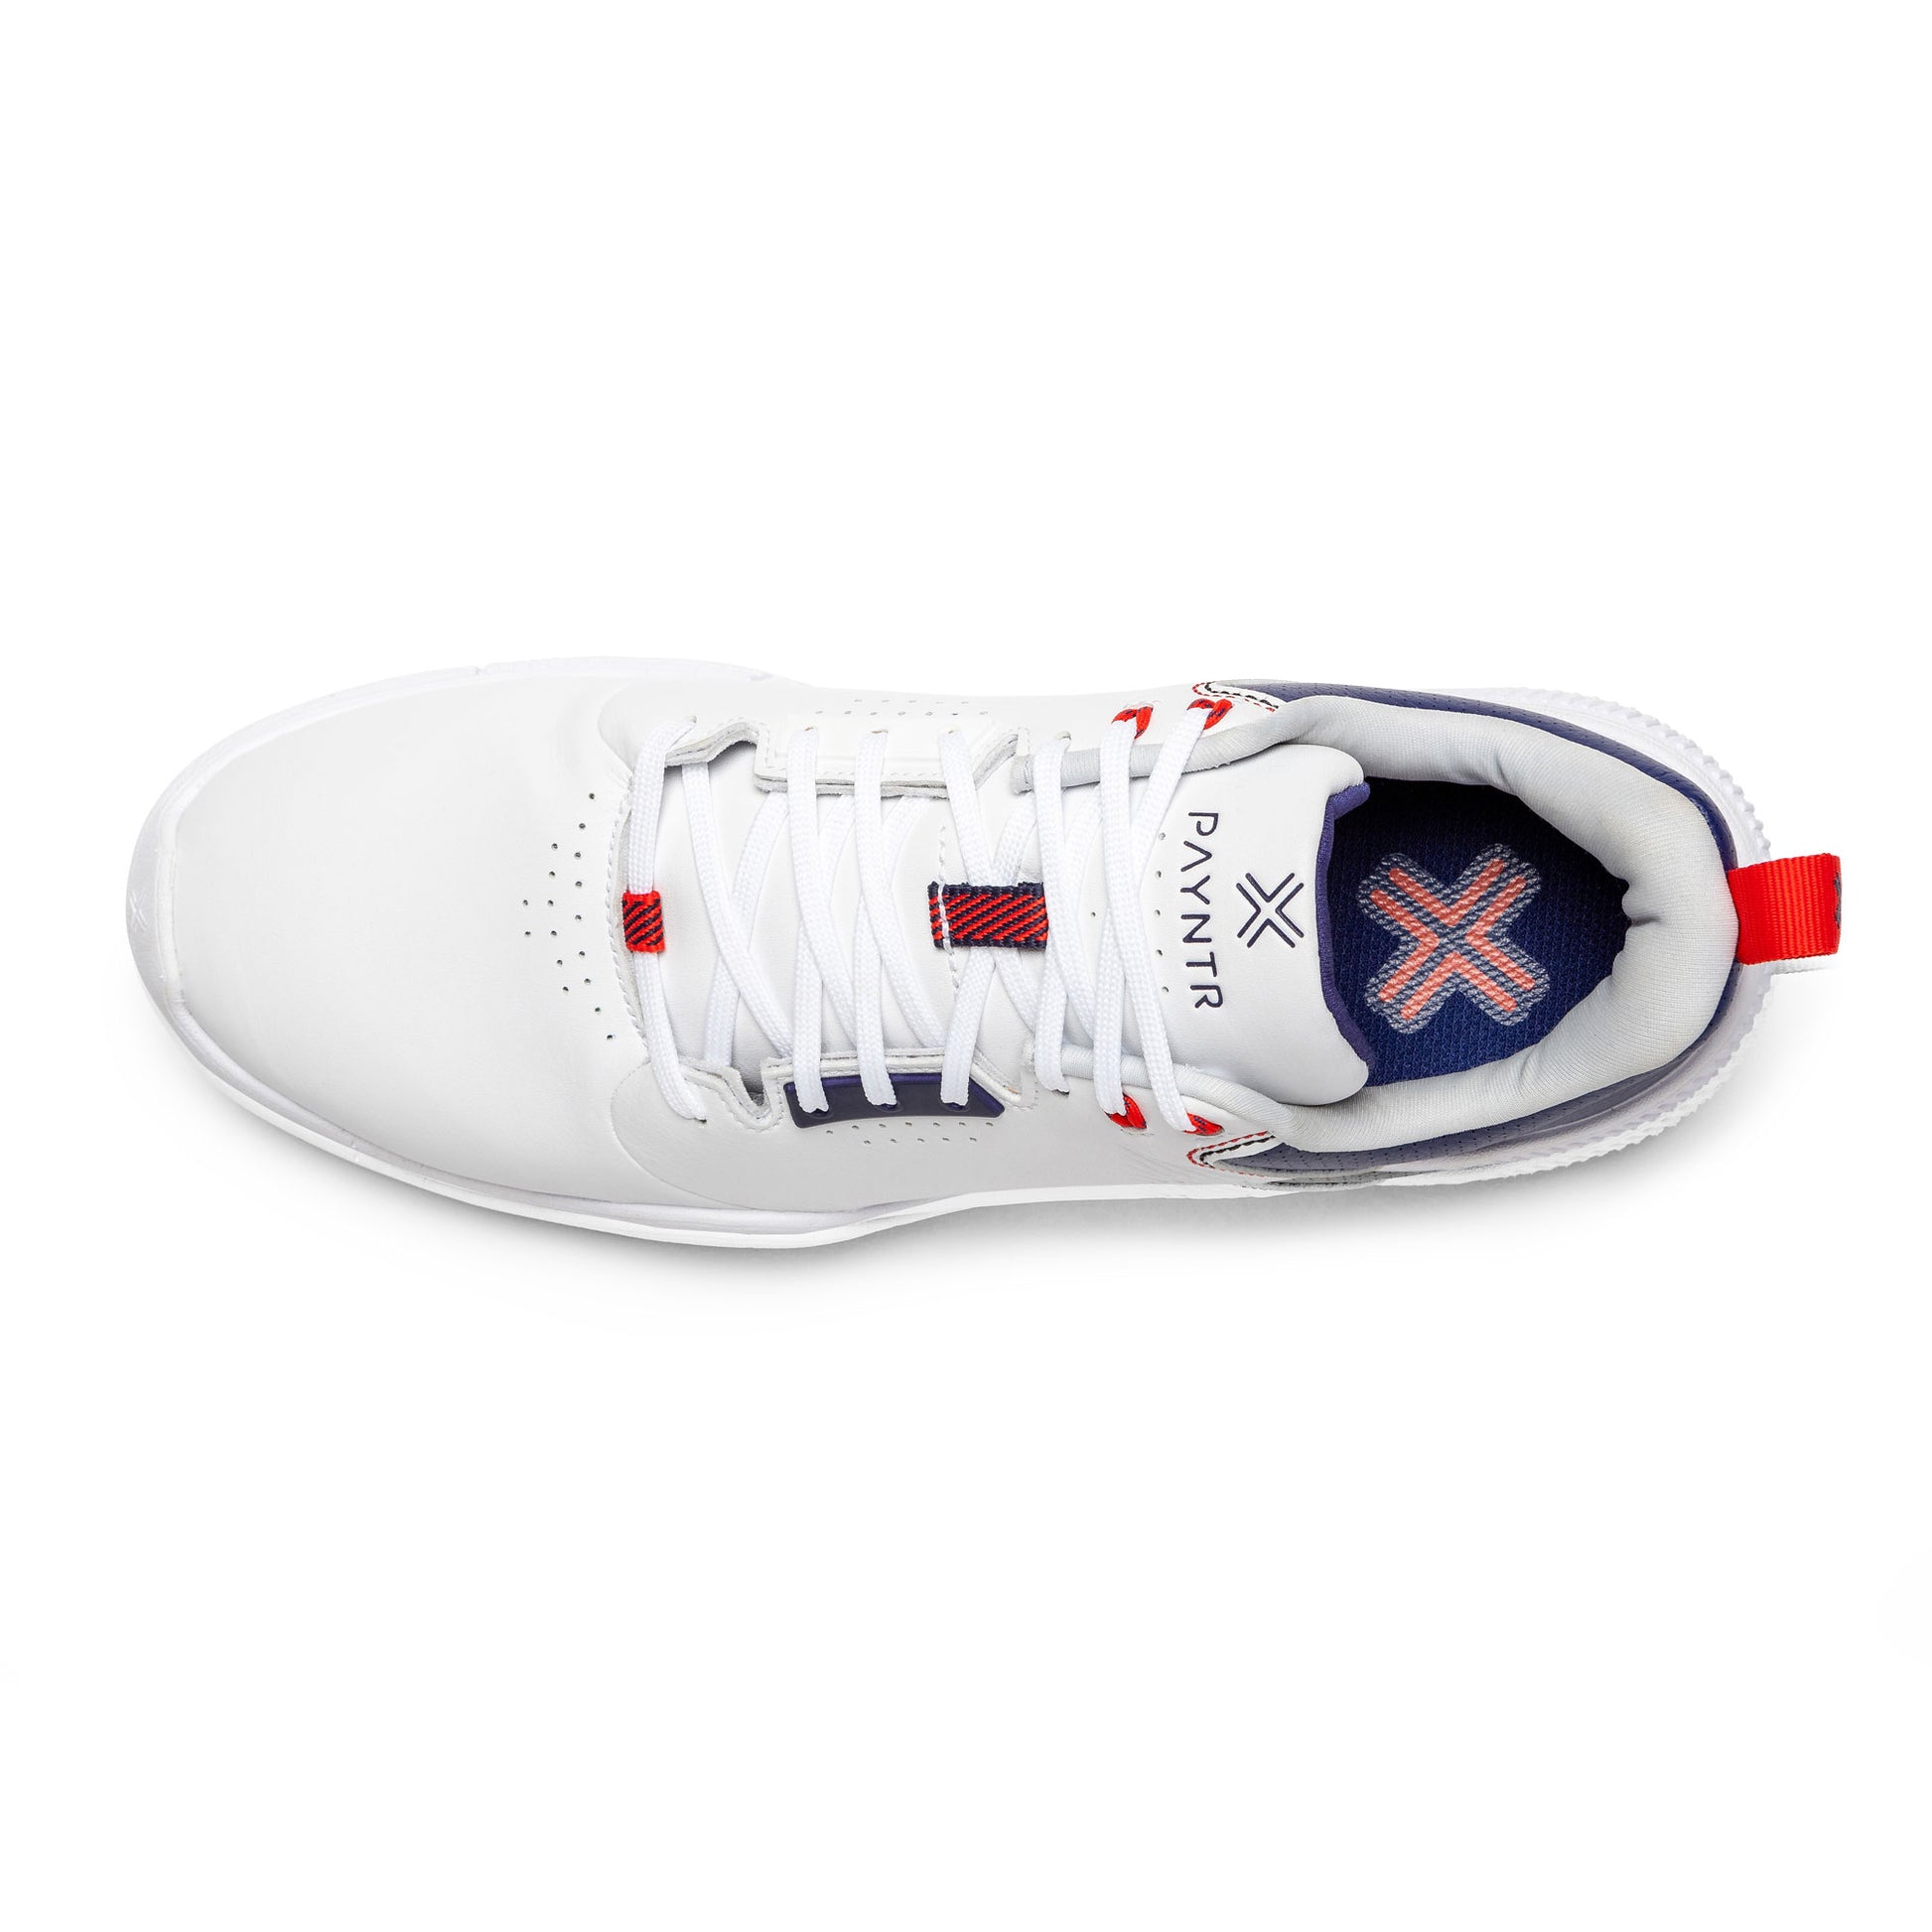 PAYNTR X-003 F Spikeless Golf Shoes (White/Navy) - Top